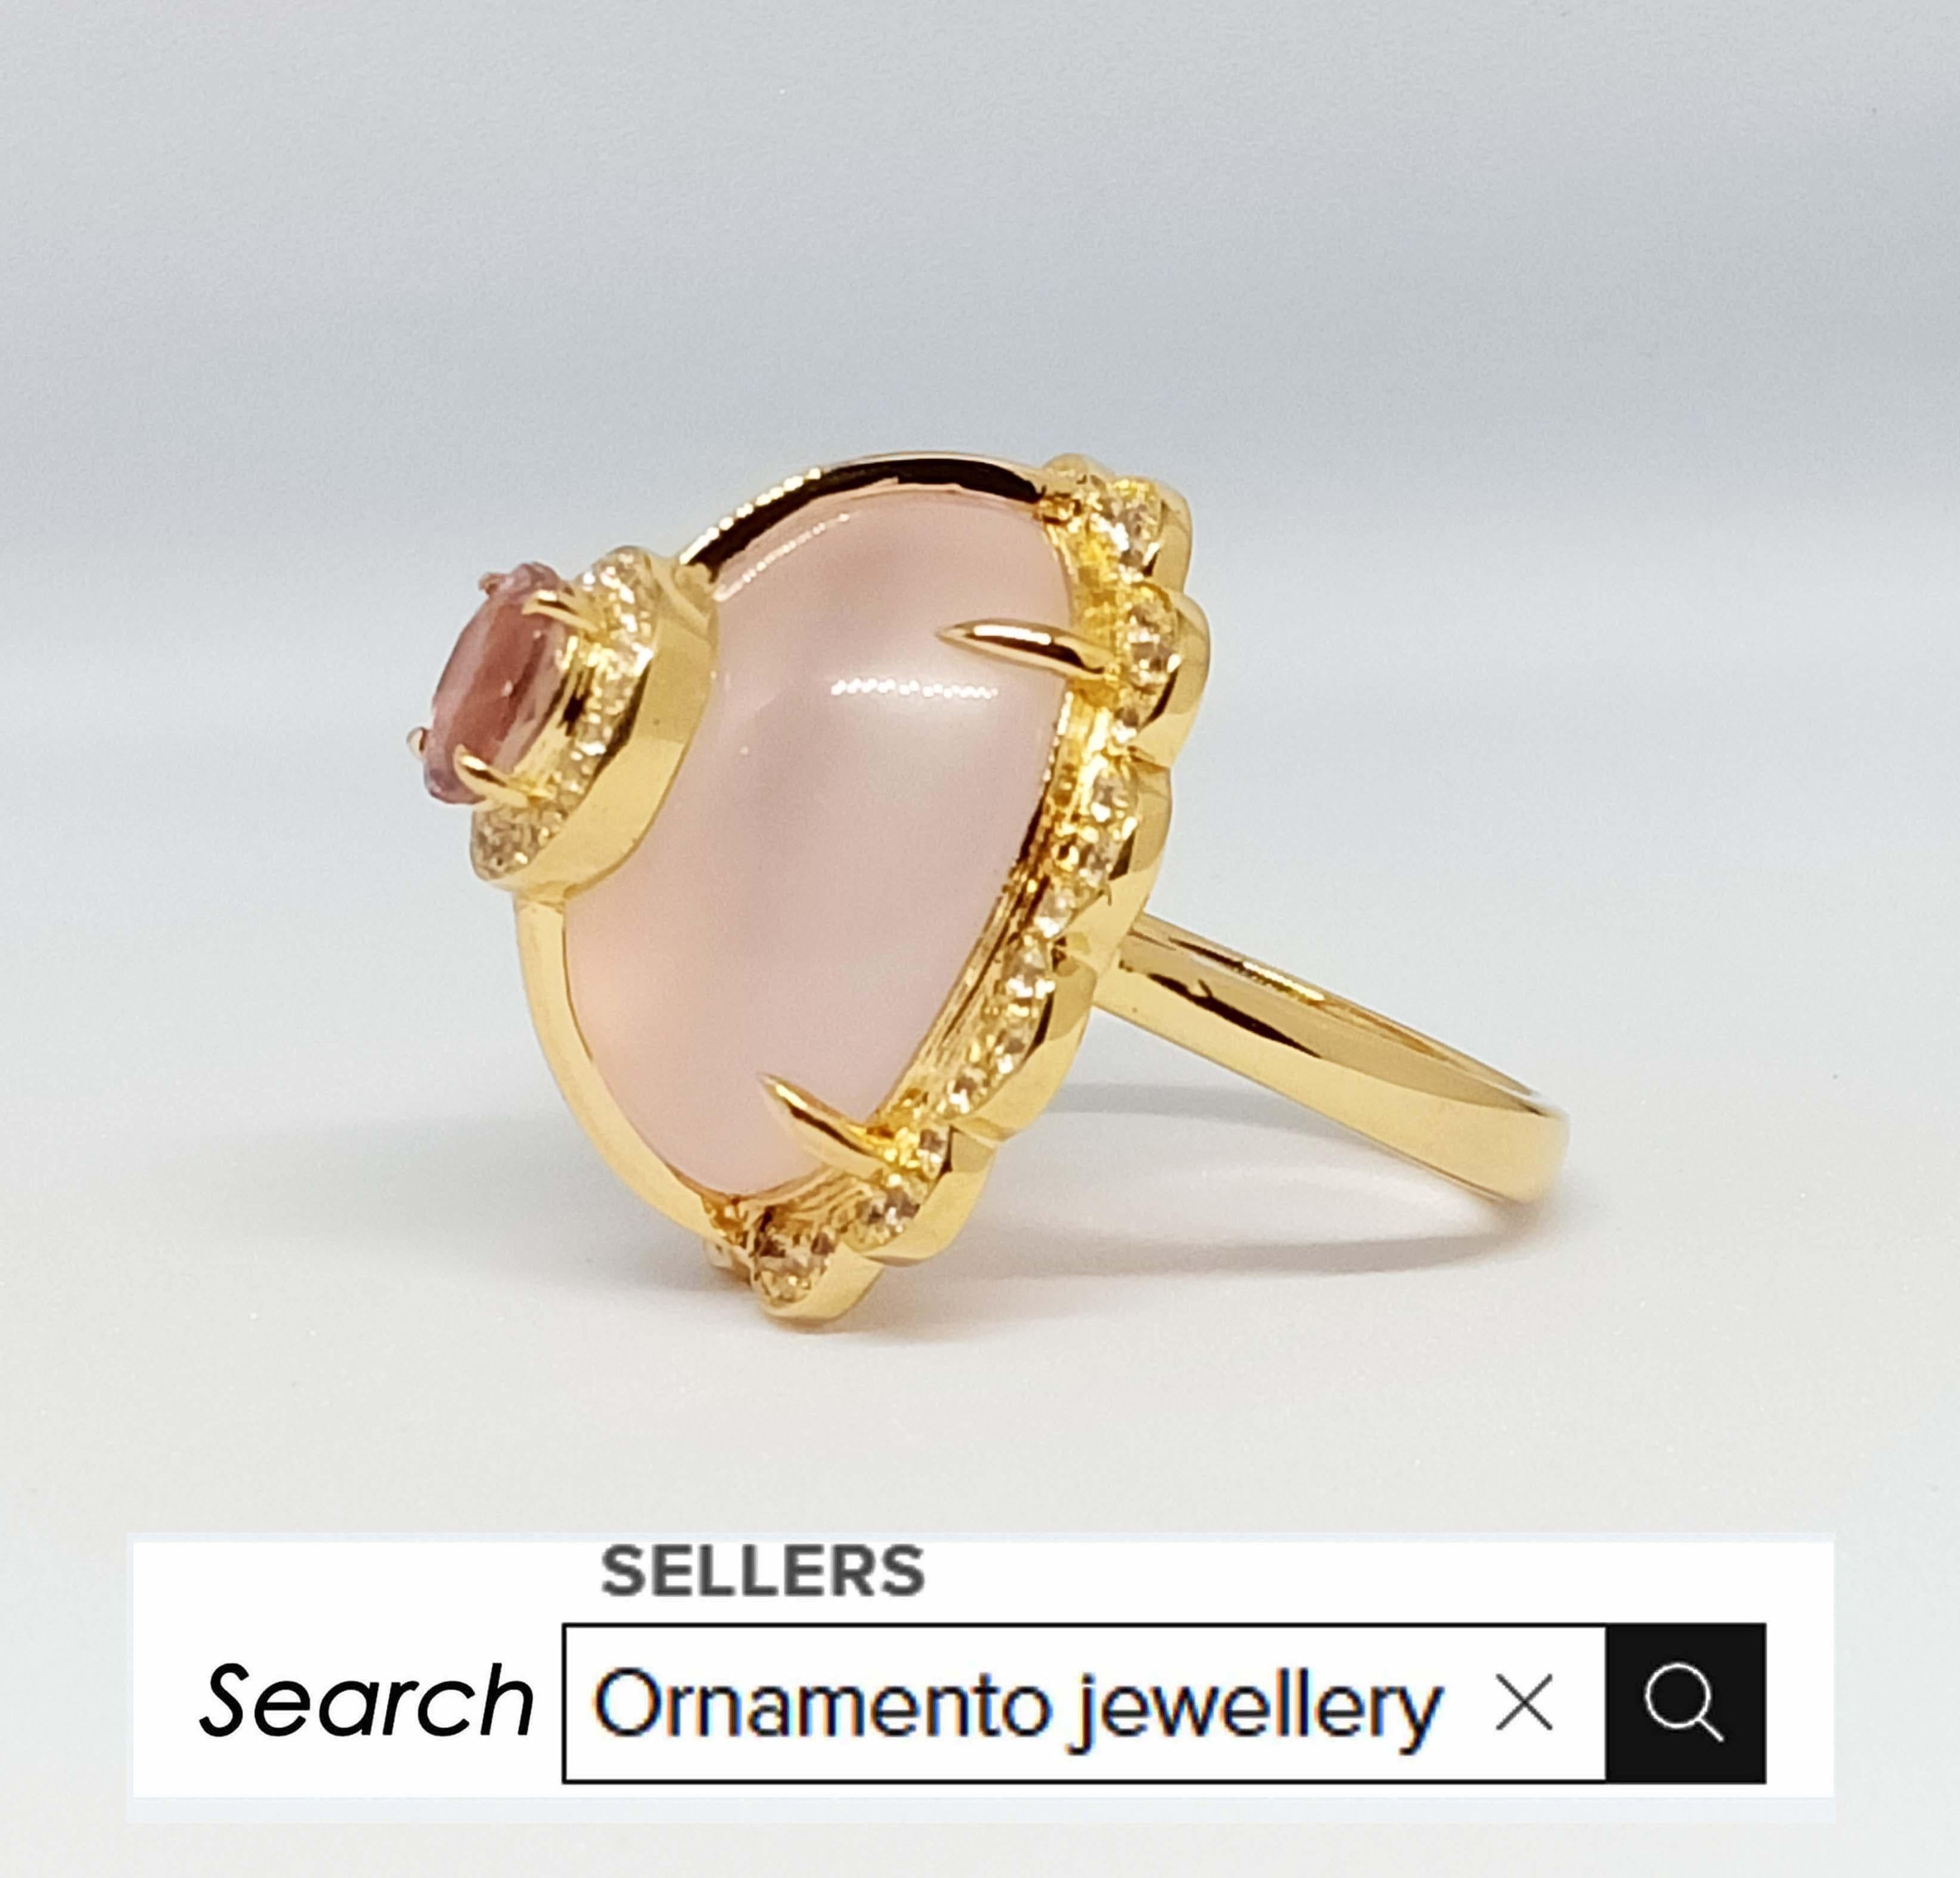 Cabochon 33.43 Cts. Rose Quartz Ring. Sterling Silver on 18K Gold Plated. For Sale